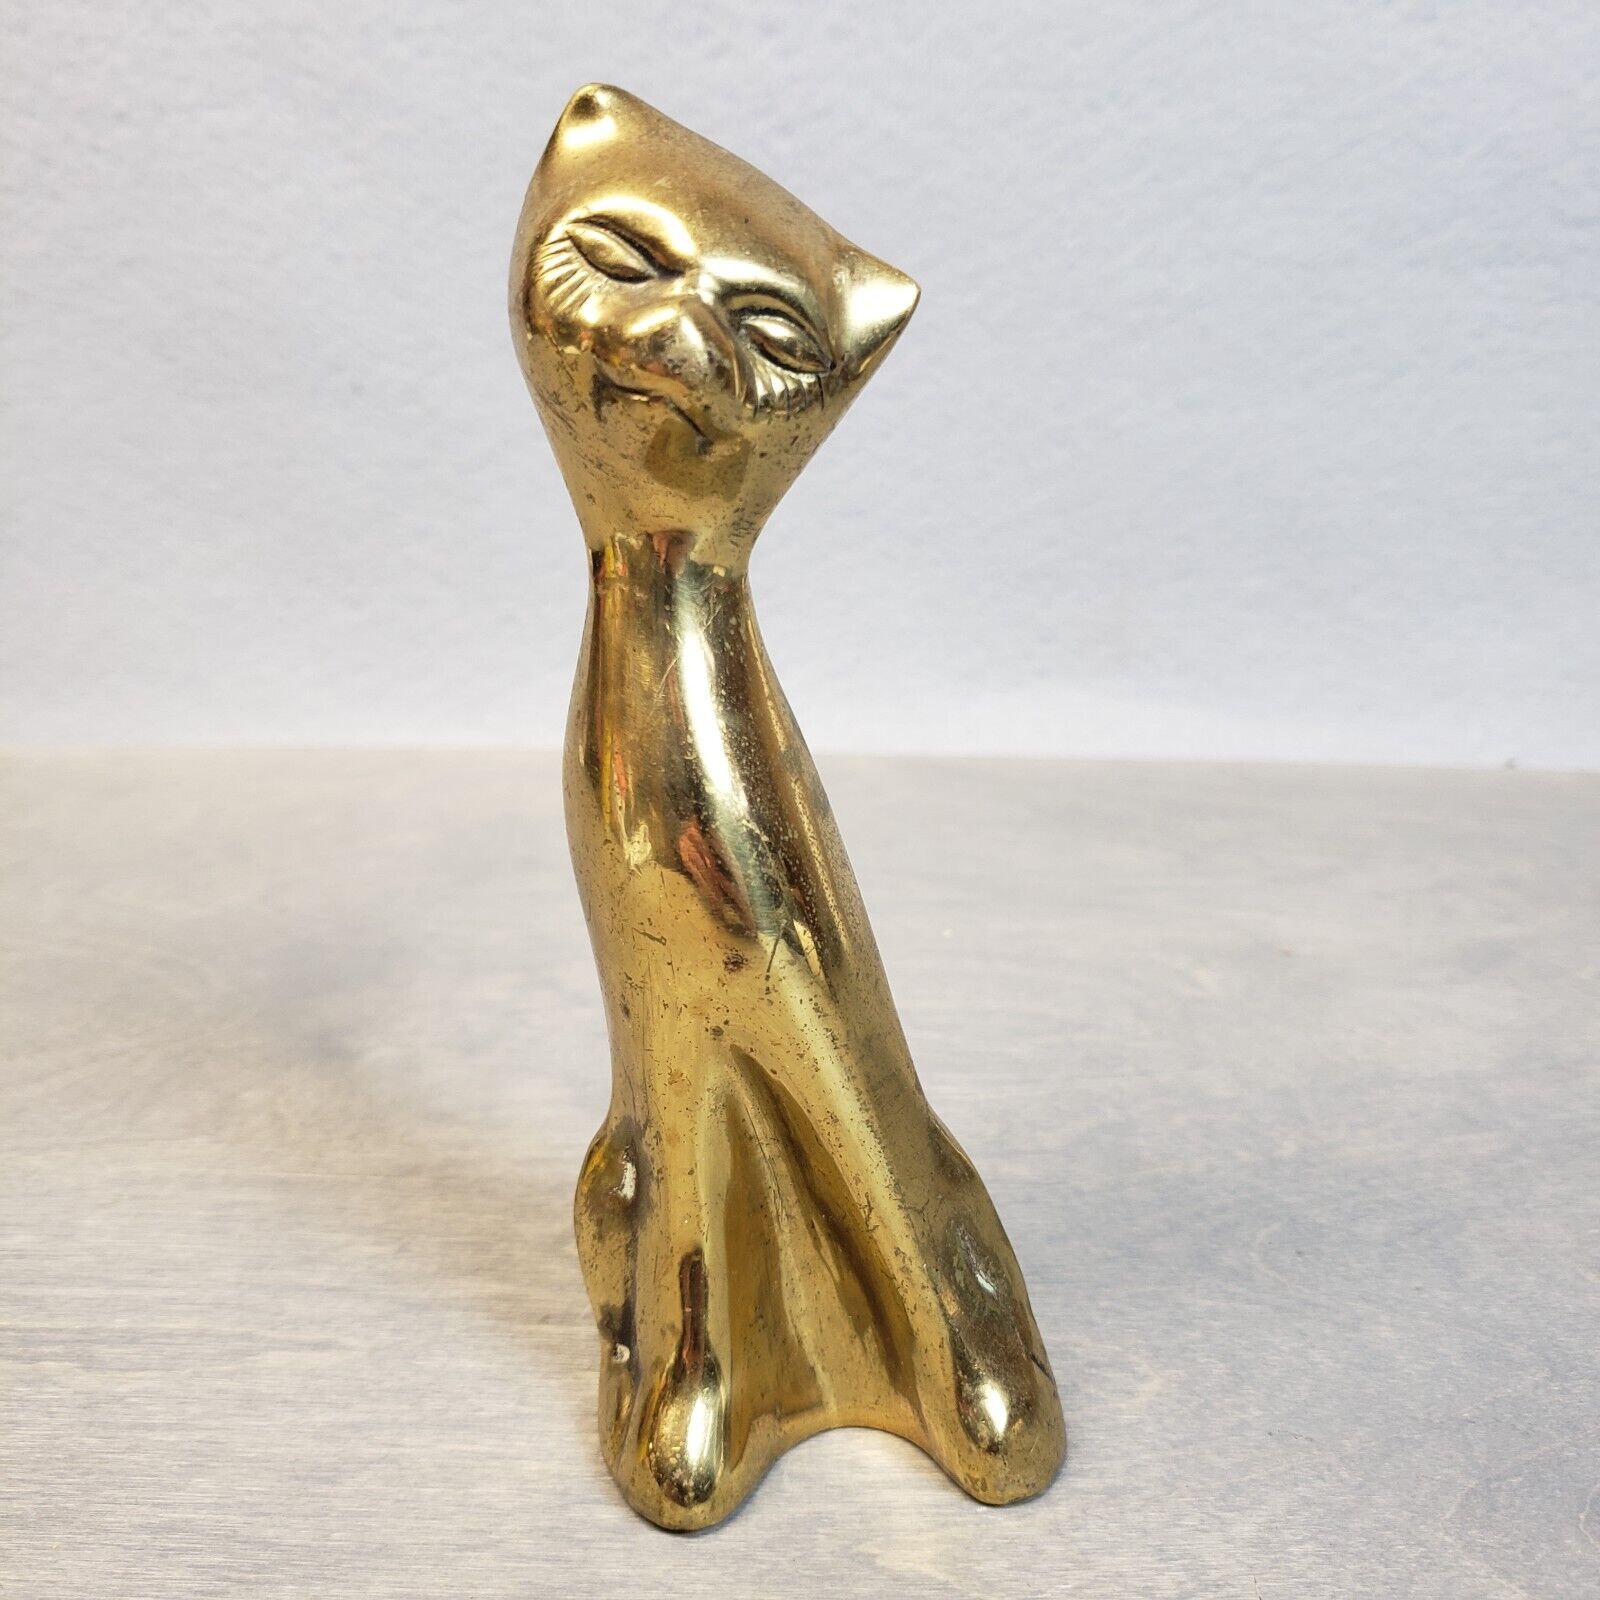 Vintage Brass Alley Cat Figurine 6 Inches Tall Siamese Cat Statue